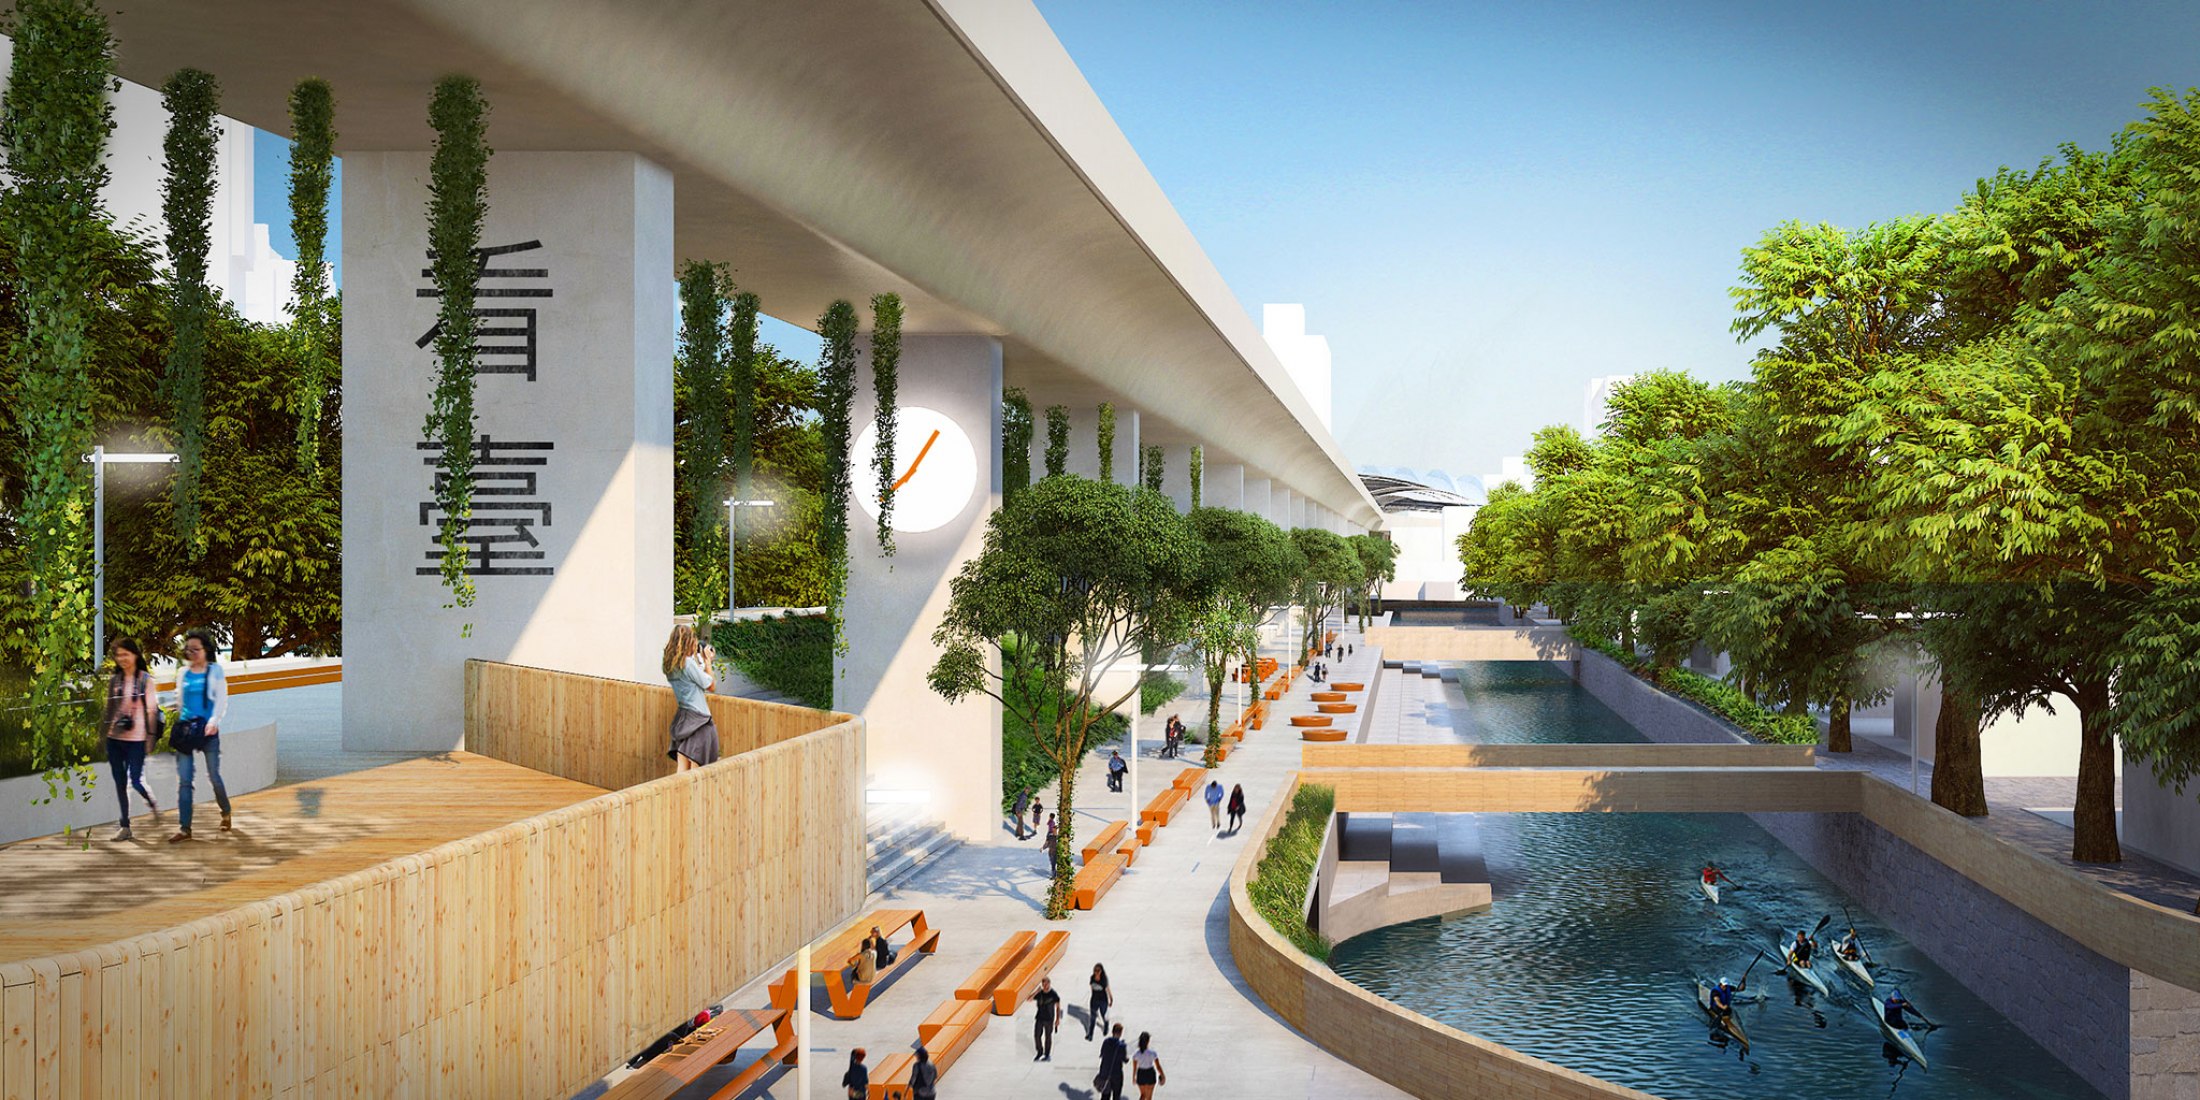 Render. Taichung Green Corridor by Mecanoo. Image courtesy of architects